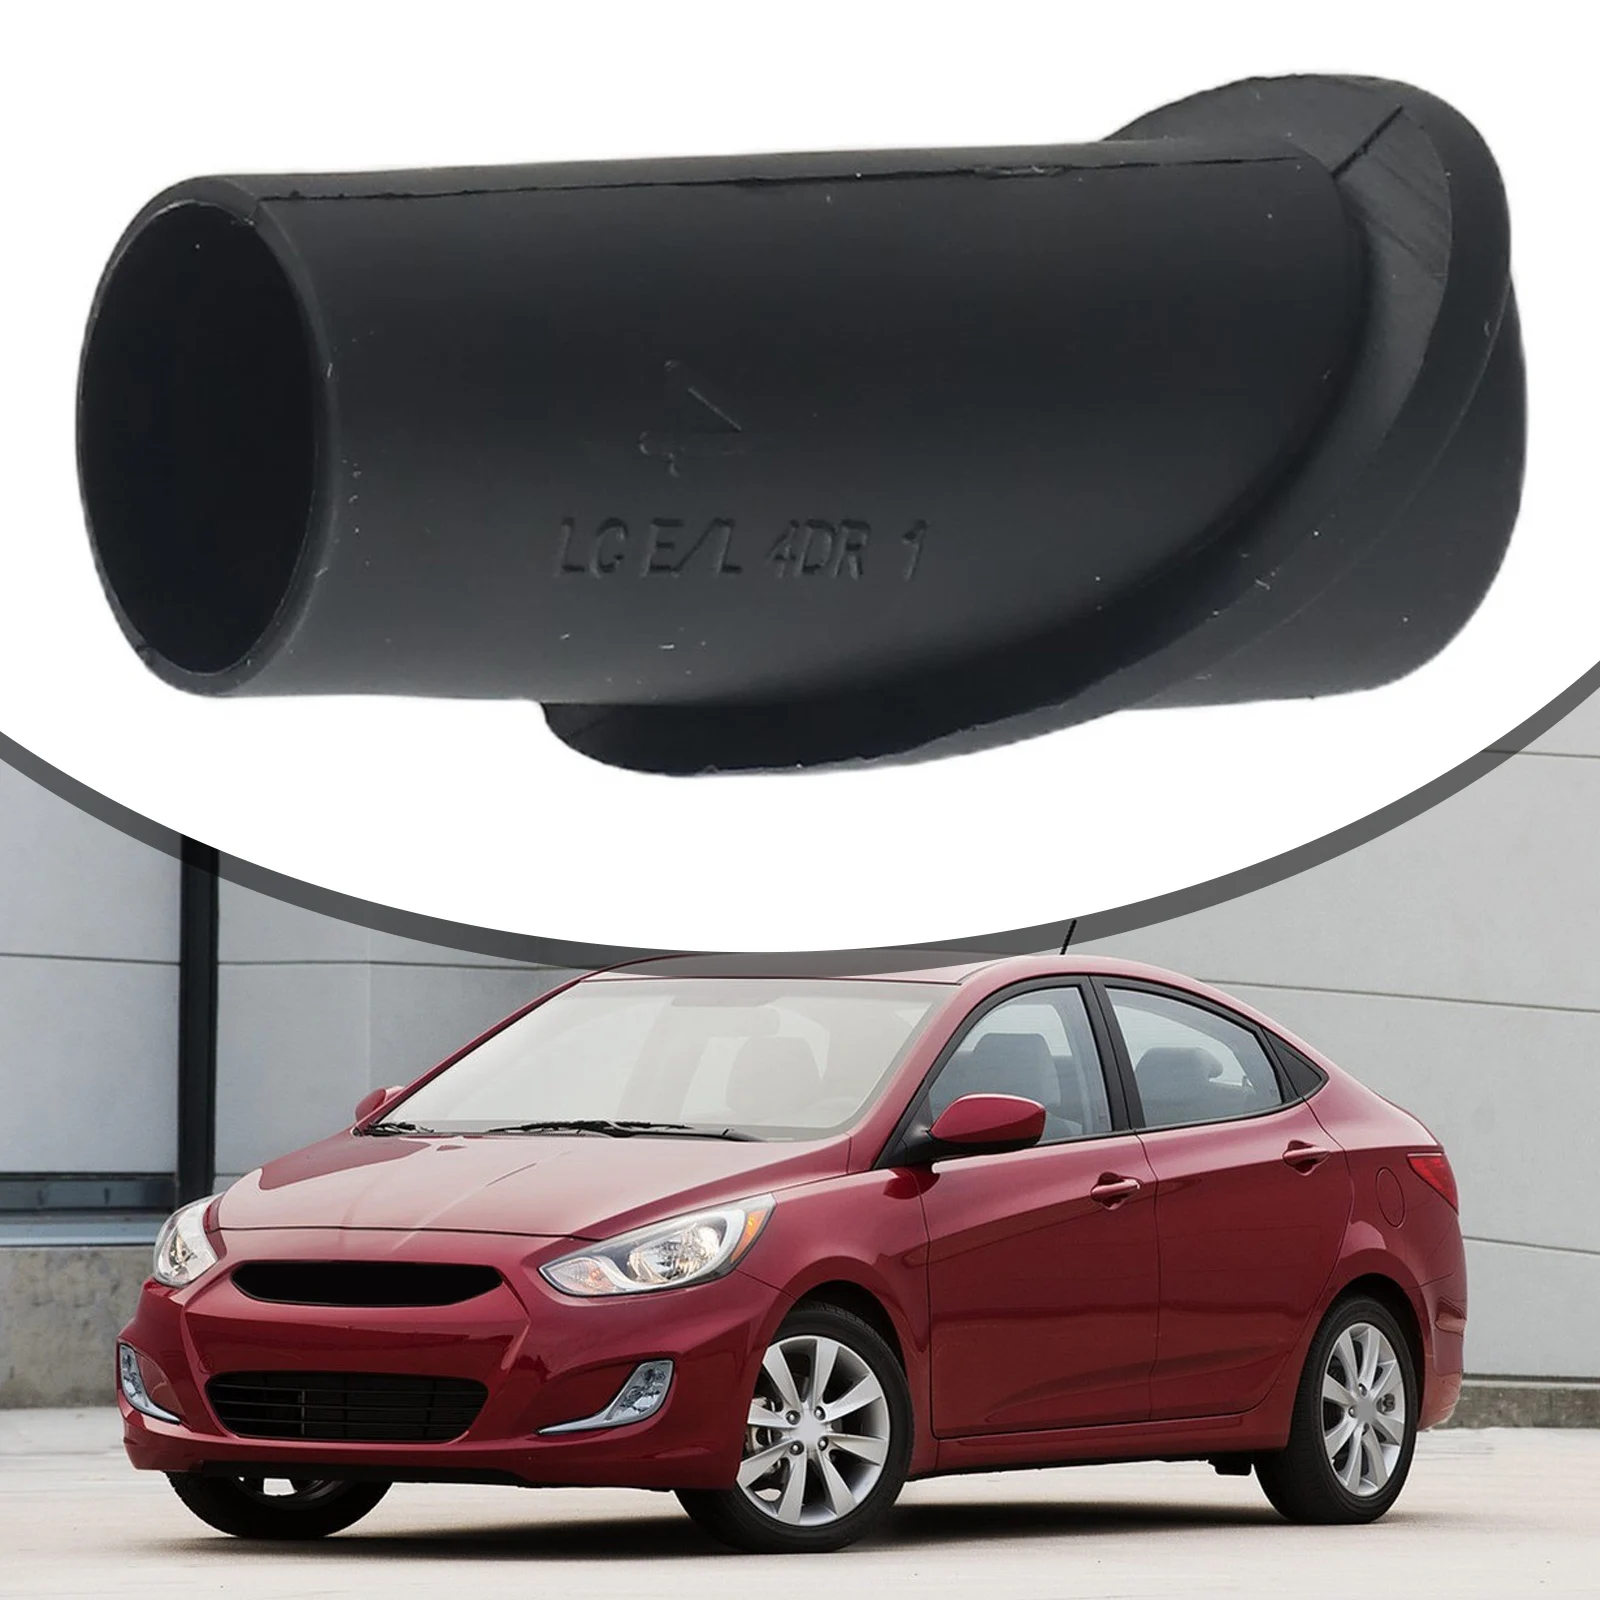 

For Hyundai For Accent 2000 2001 2002 Car Antenna Mounting Base Assembly Seal Pad Plastic Antenna Base 96250-25040